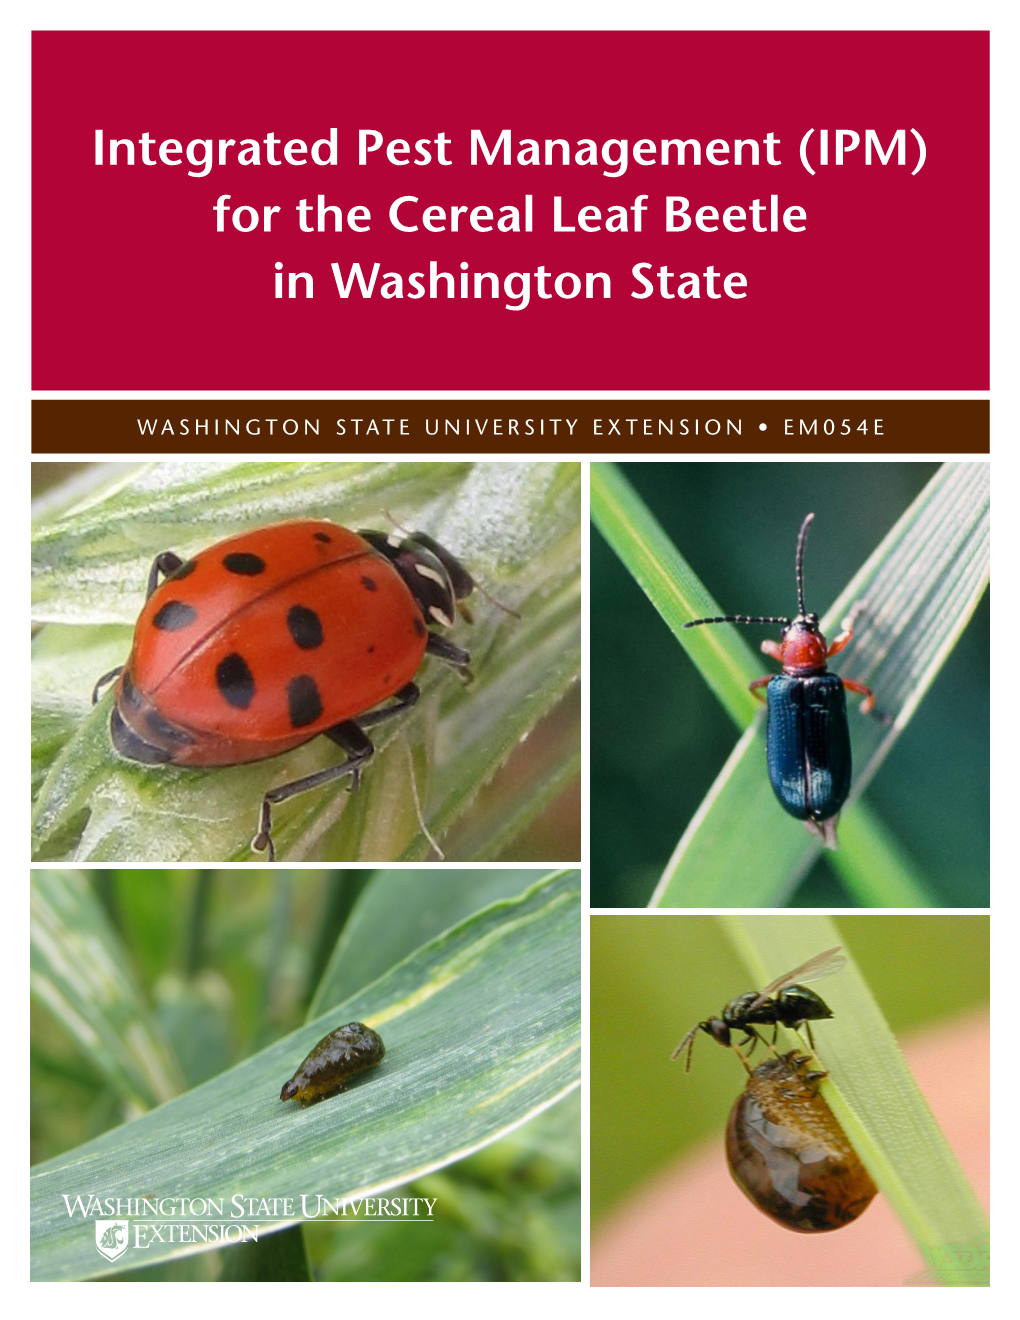 Integrated Pest Management (IPM) for the Cereal Leaf Beetle in Washington State